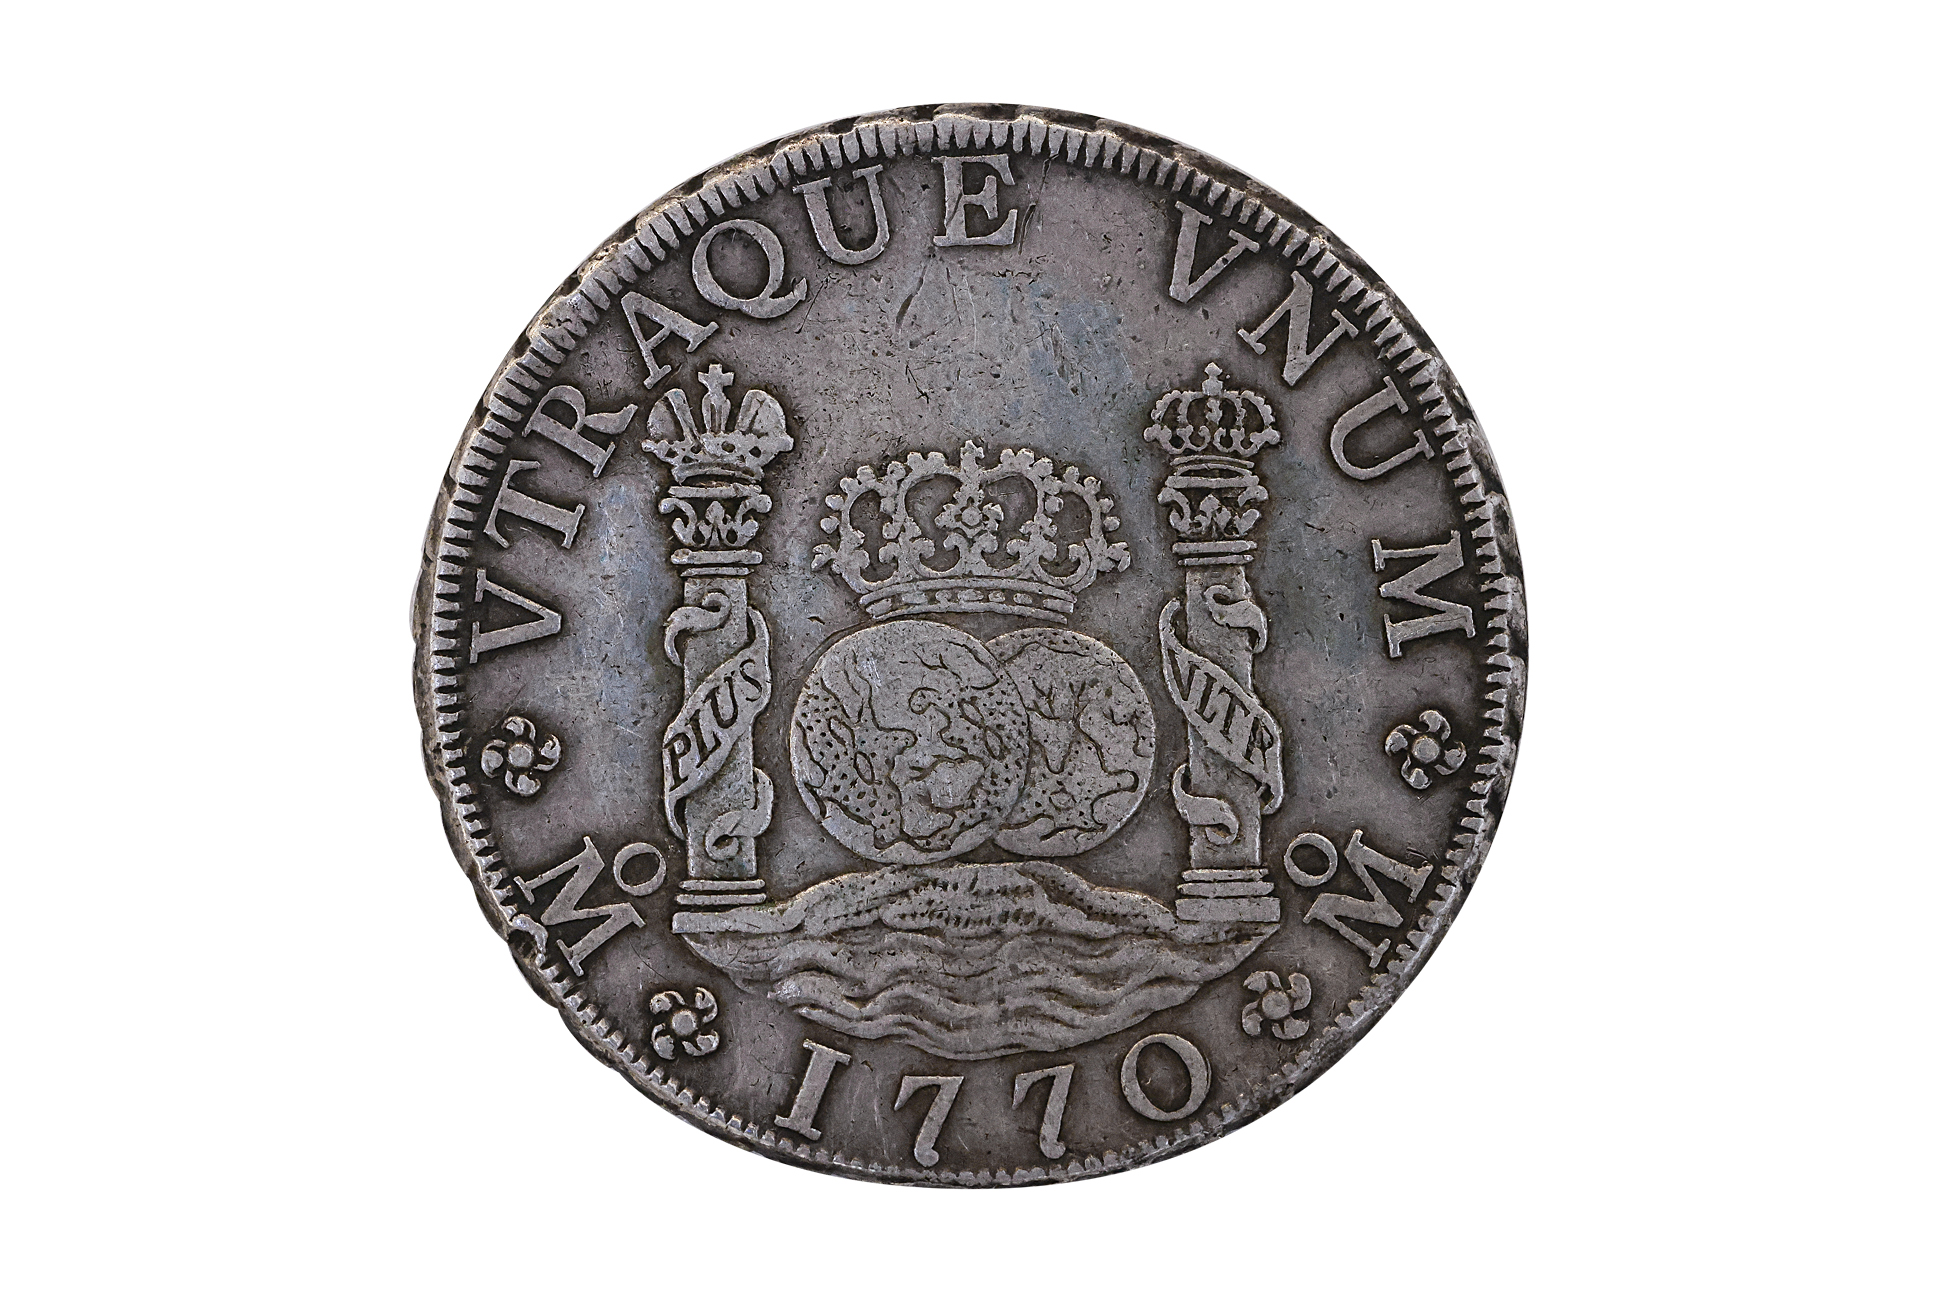 MEXICO 8 REALES PILLAR 1770 - Image 2 of 2